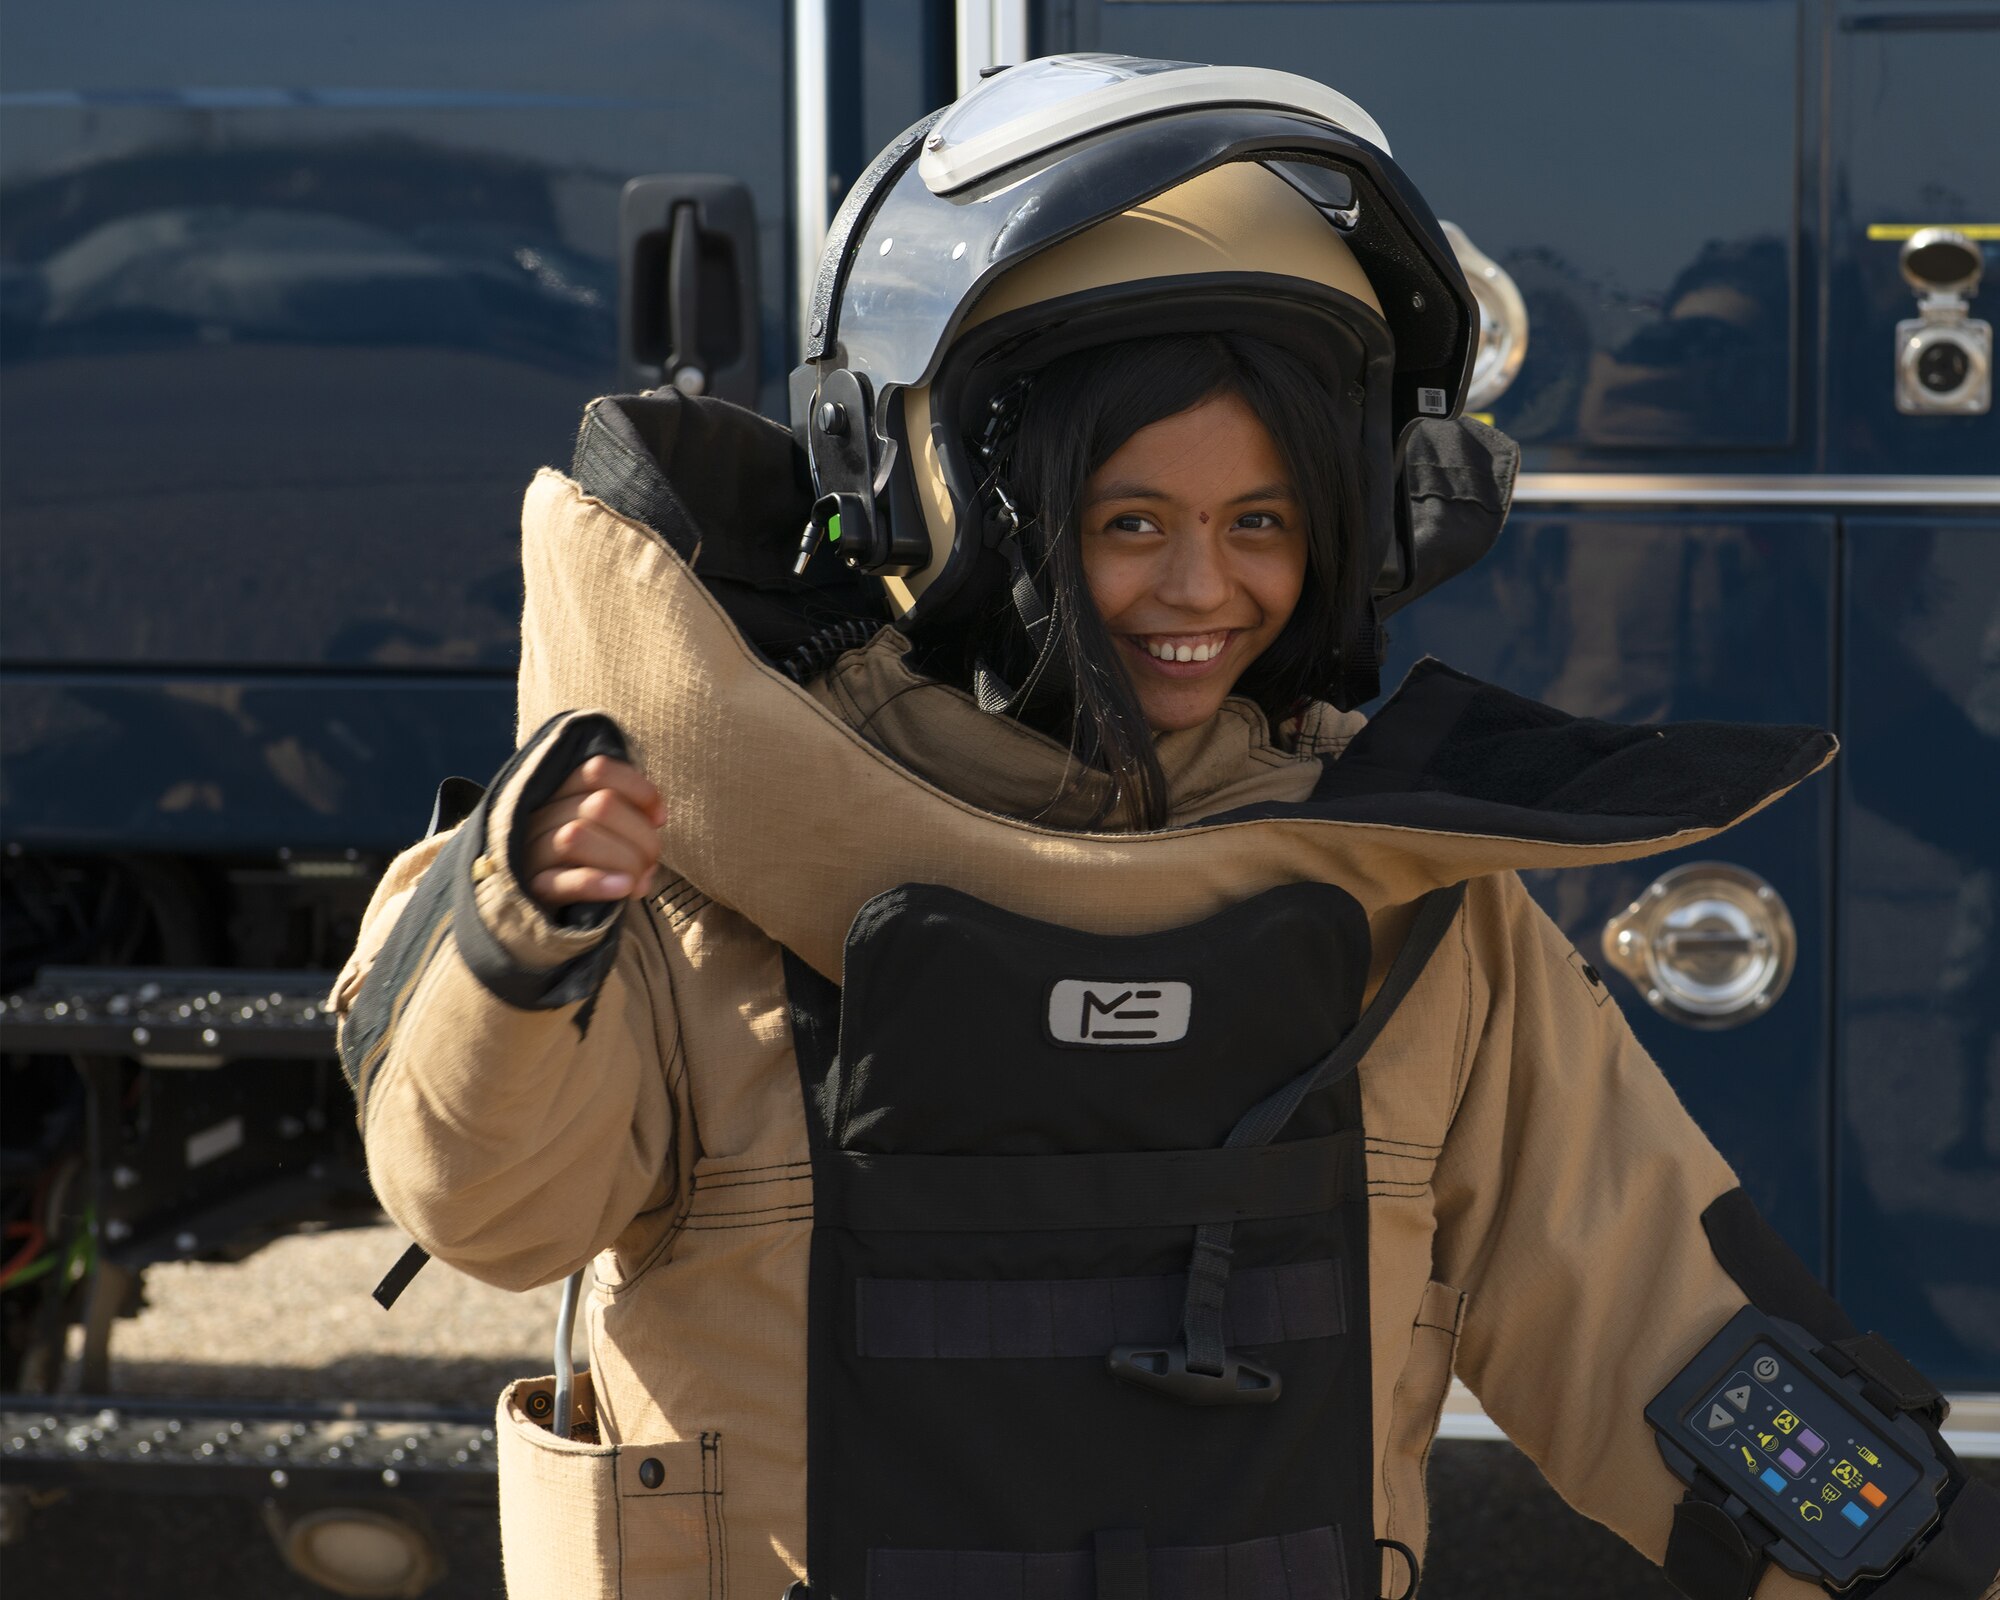 Trinity Garcia, a member of the Childhelp program, wears an Explosive Ordnance Disposal 9 bomb suit during the Childhelp Kids Day of Hope tour Oct. 16, 2019, at Luke Air Force Base, Ariz.